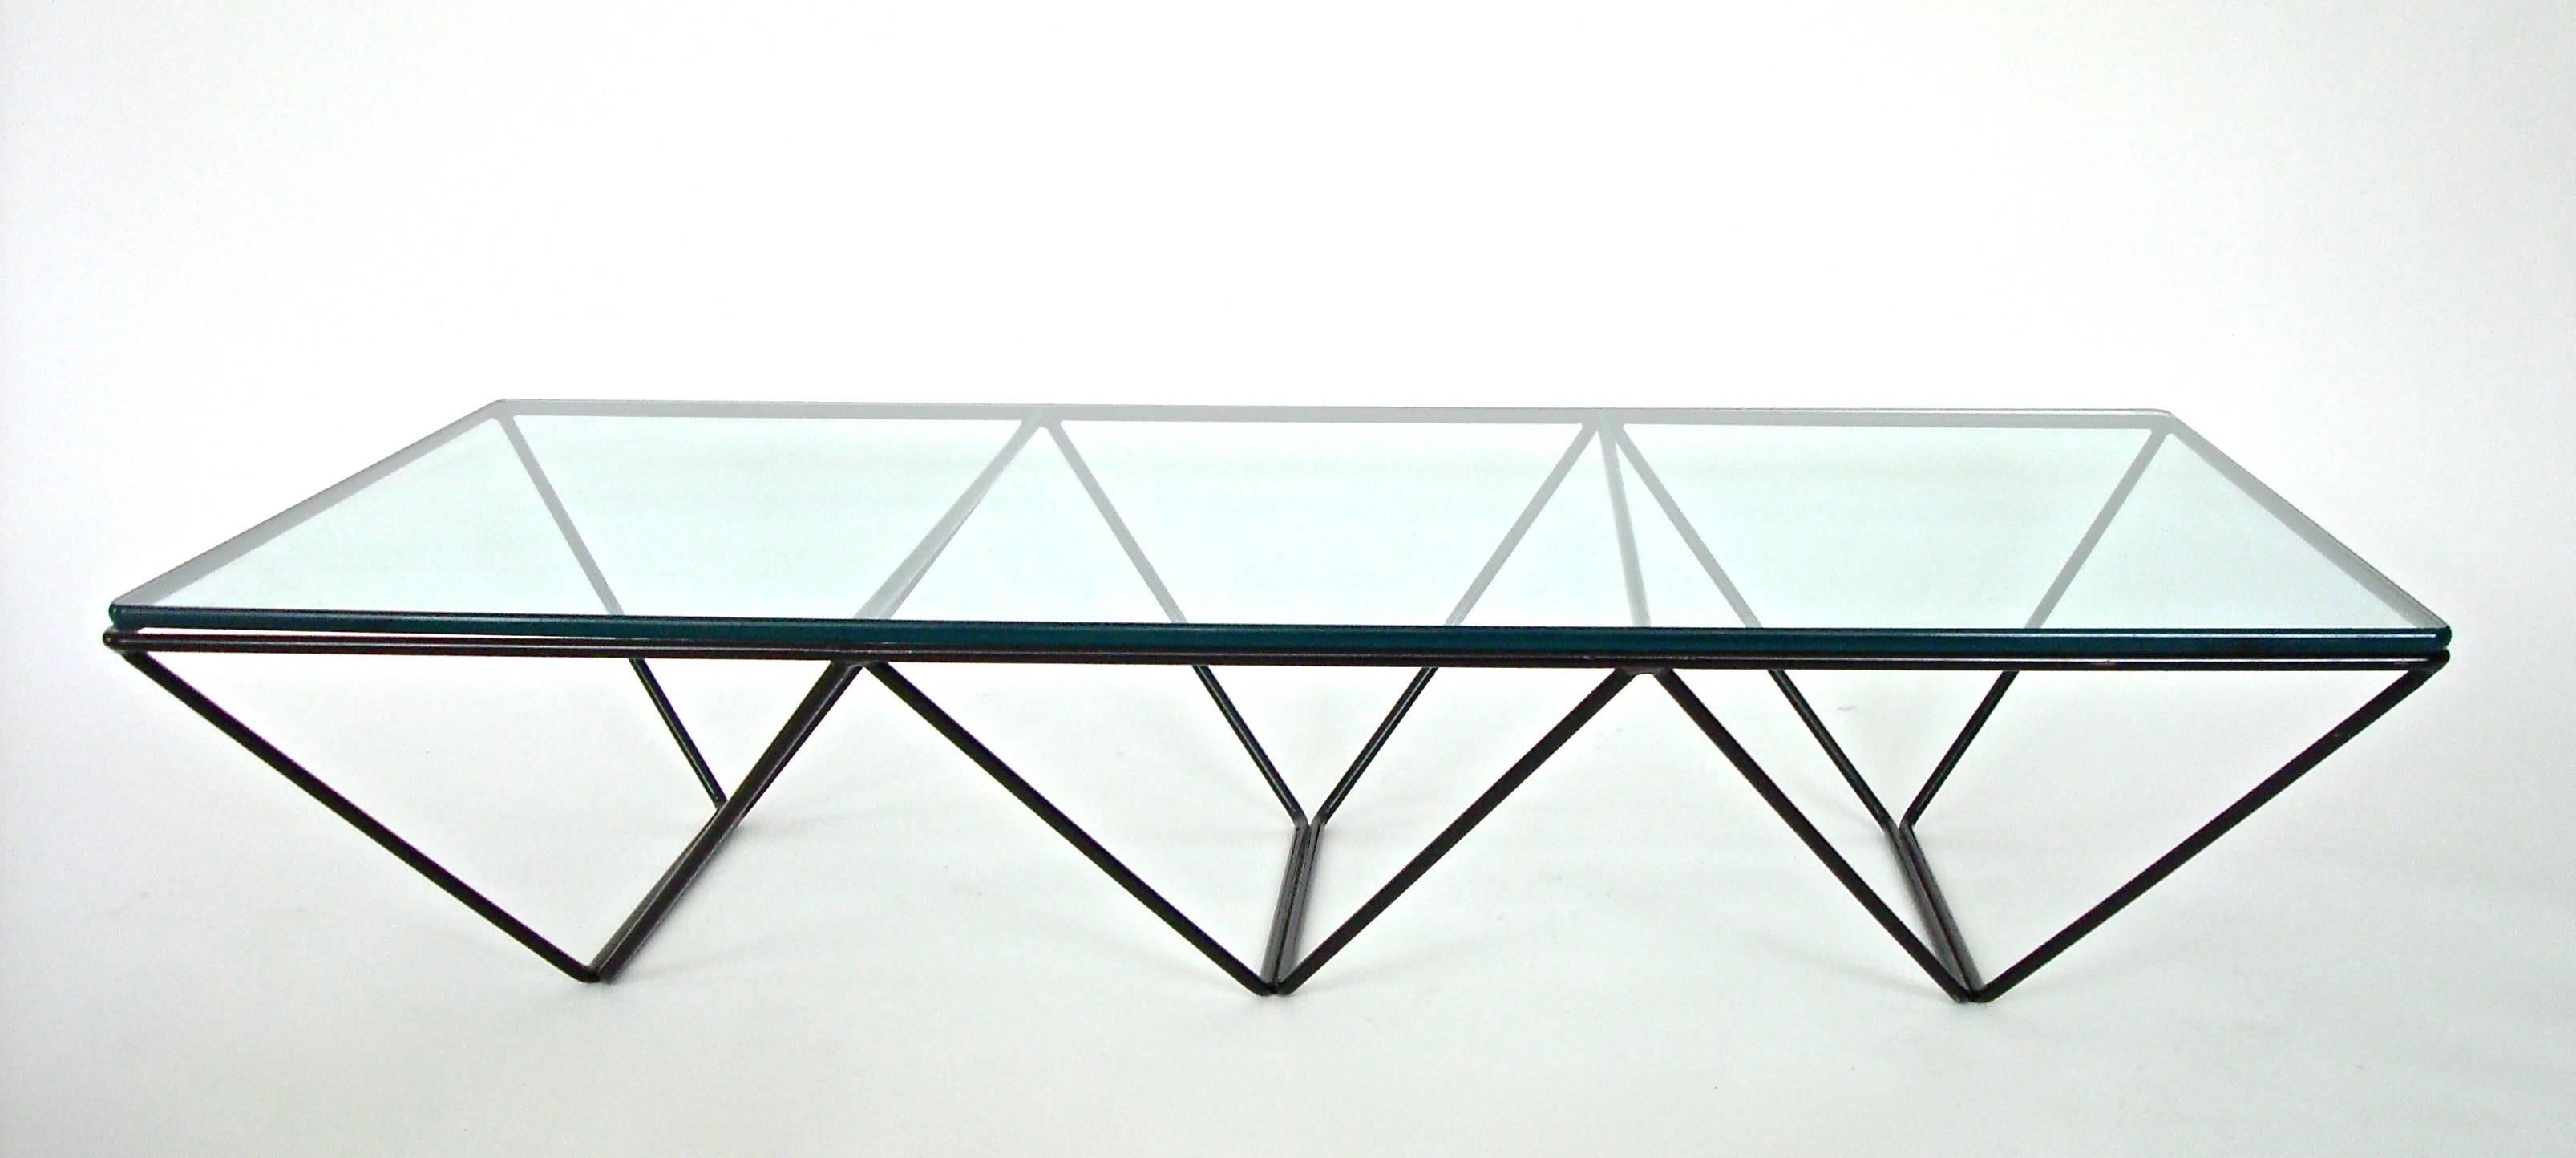 The architectural Alanda low coffee table by Paolo Piva was editioned by B&B Italia, circa 1980. This example is highly desired. It has three sections making it a rectangle rather than a square. Welded enameled black powder coated steel rods with a